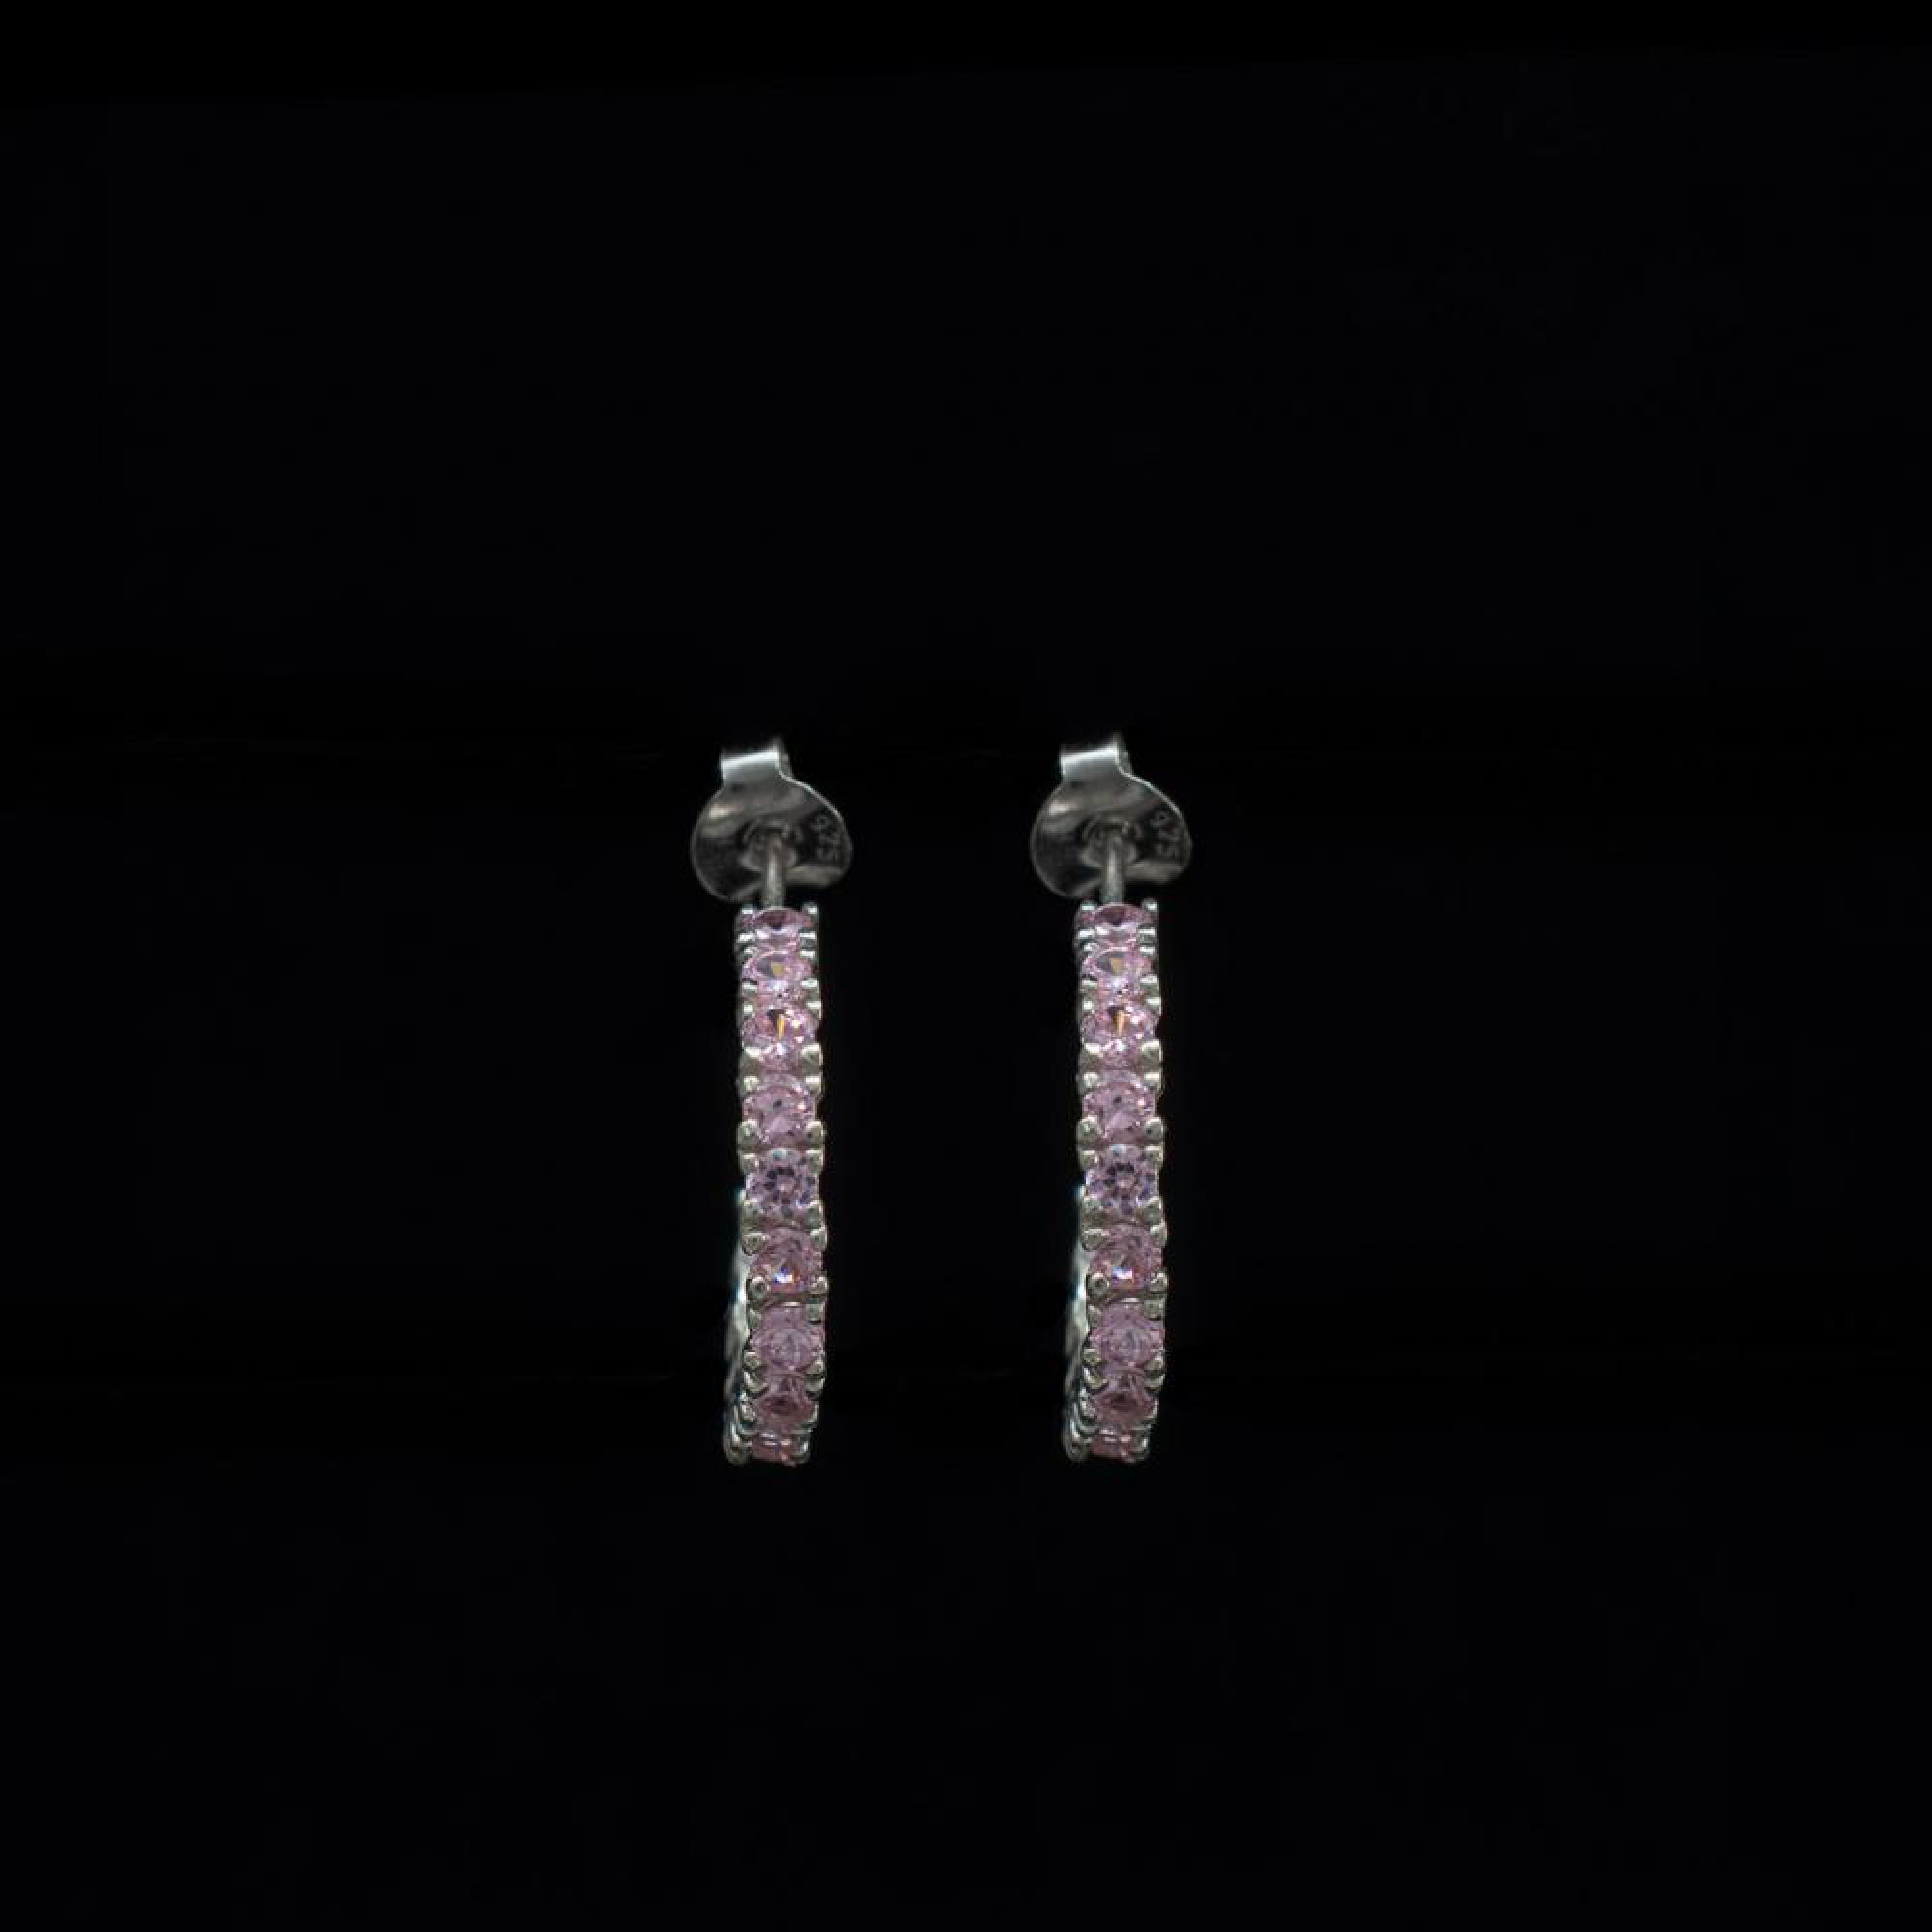 Silver earrings with pink quartz stones